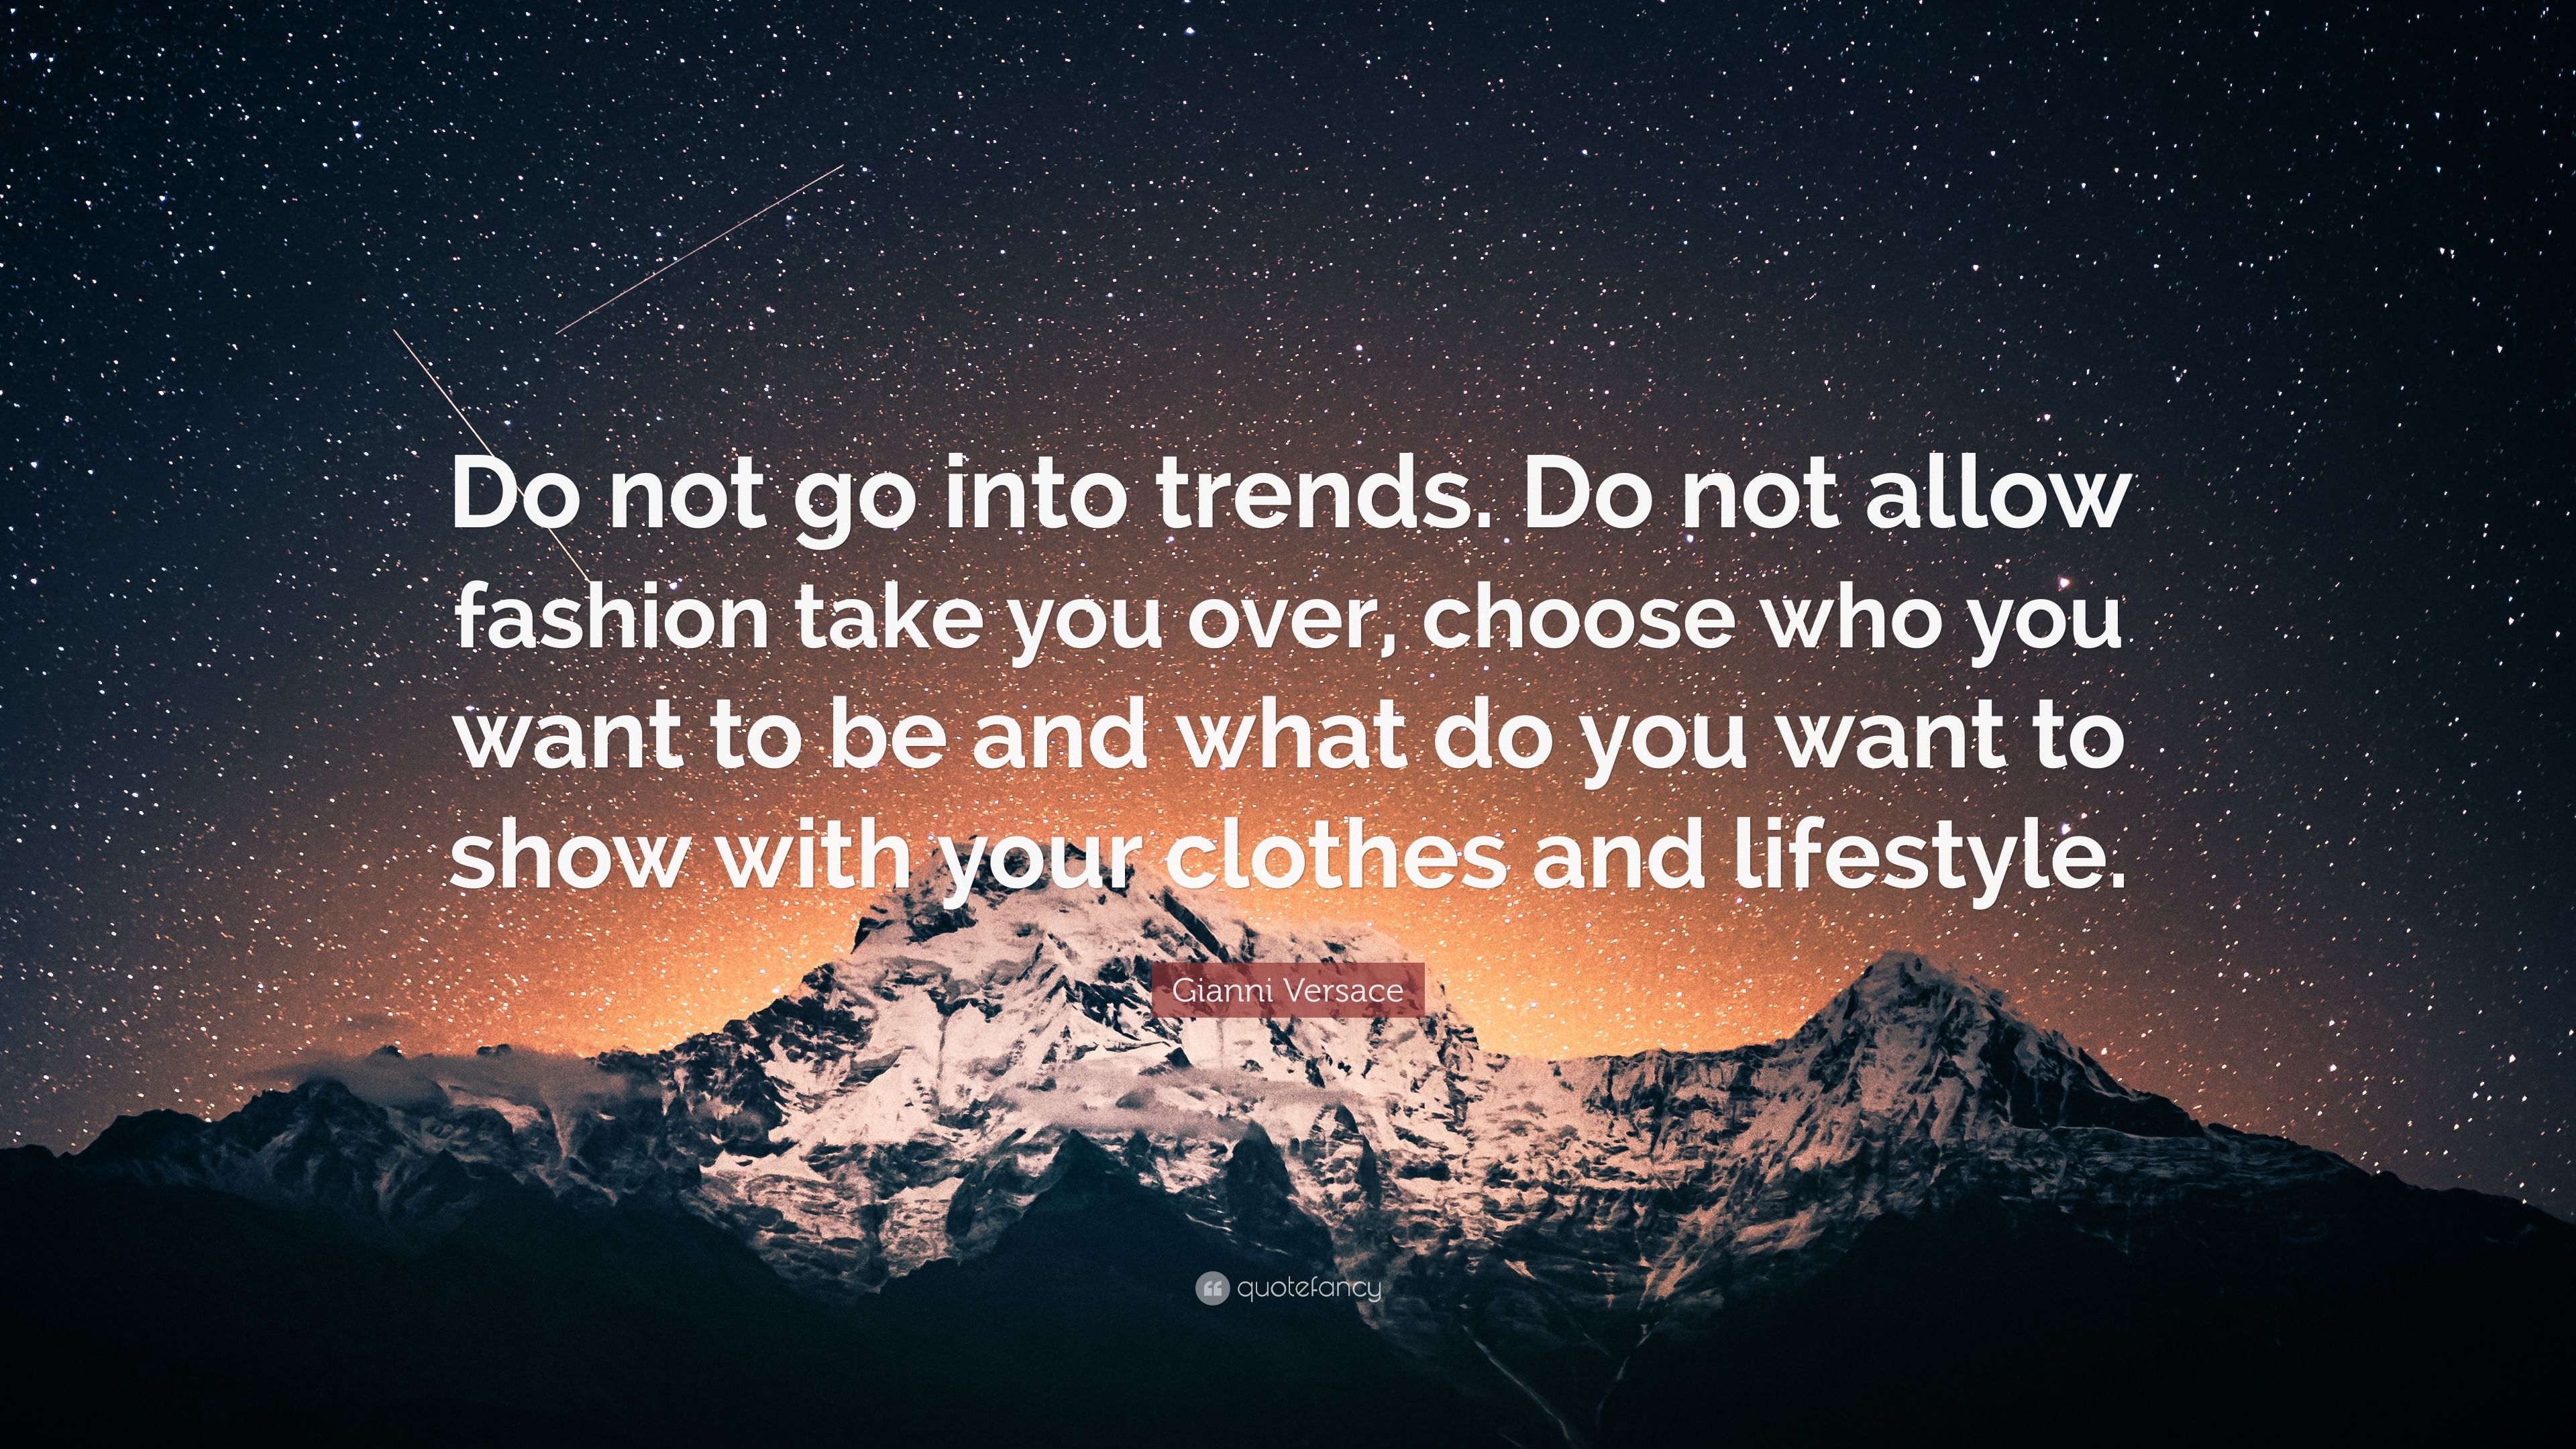 Gianni Versace Quote: “Do not go into trends. Do not allow fashion